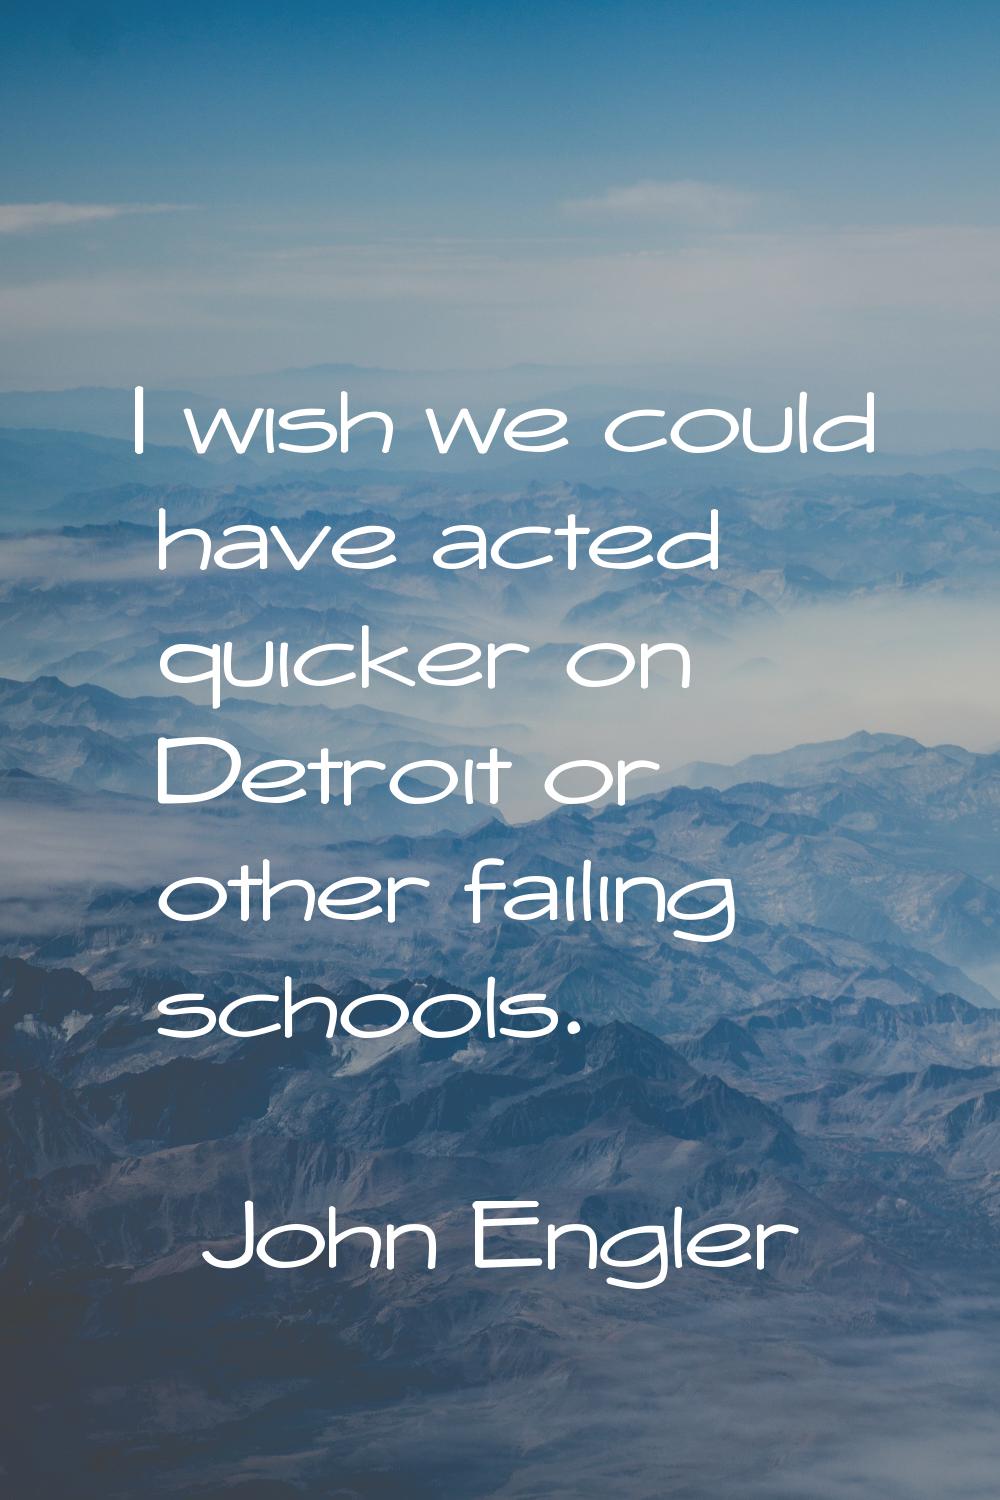 I wish we could have acted quicker on Detroit or other failing schools.